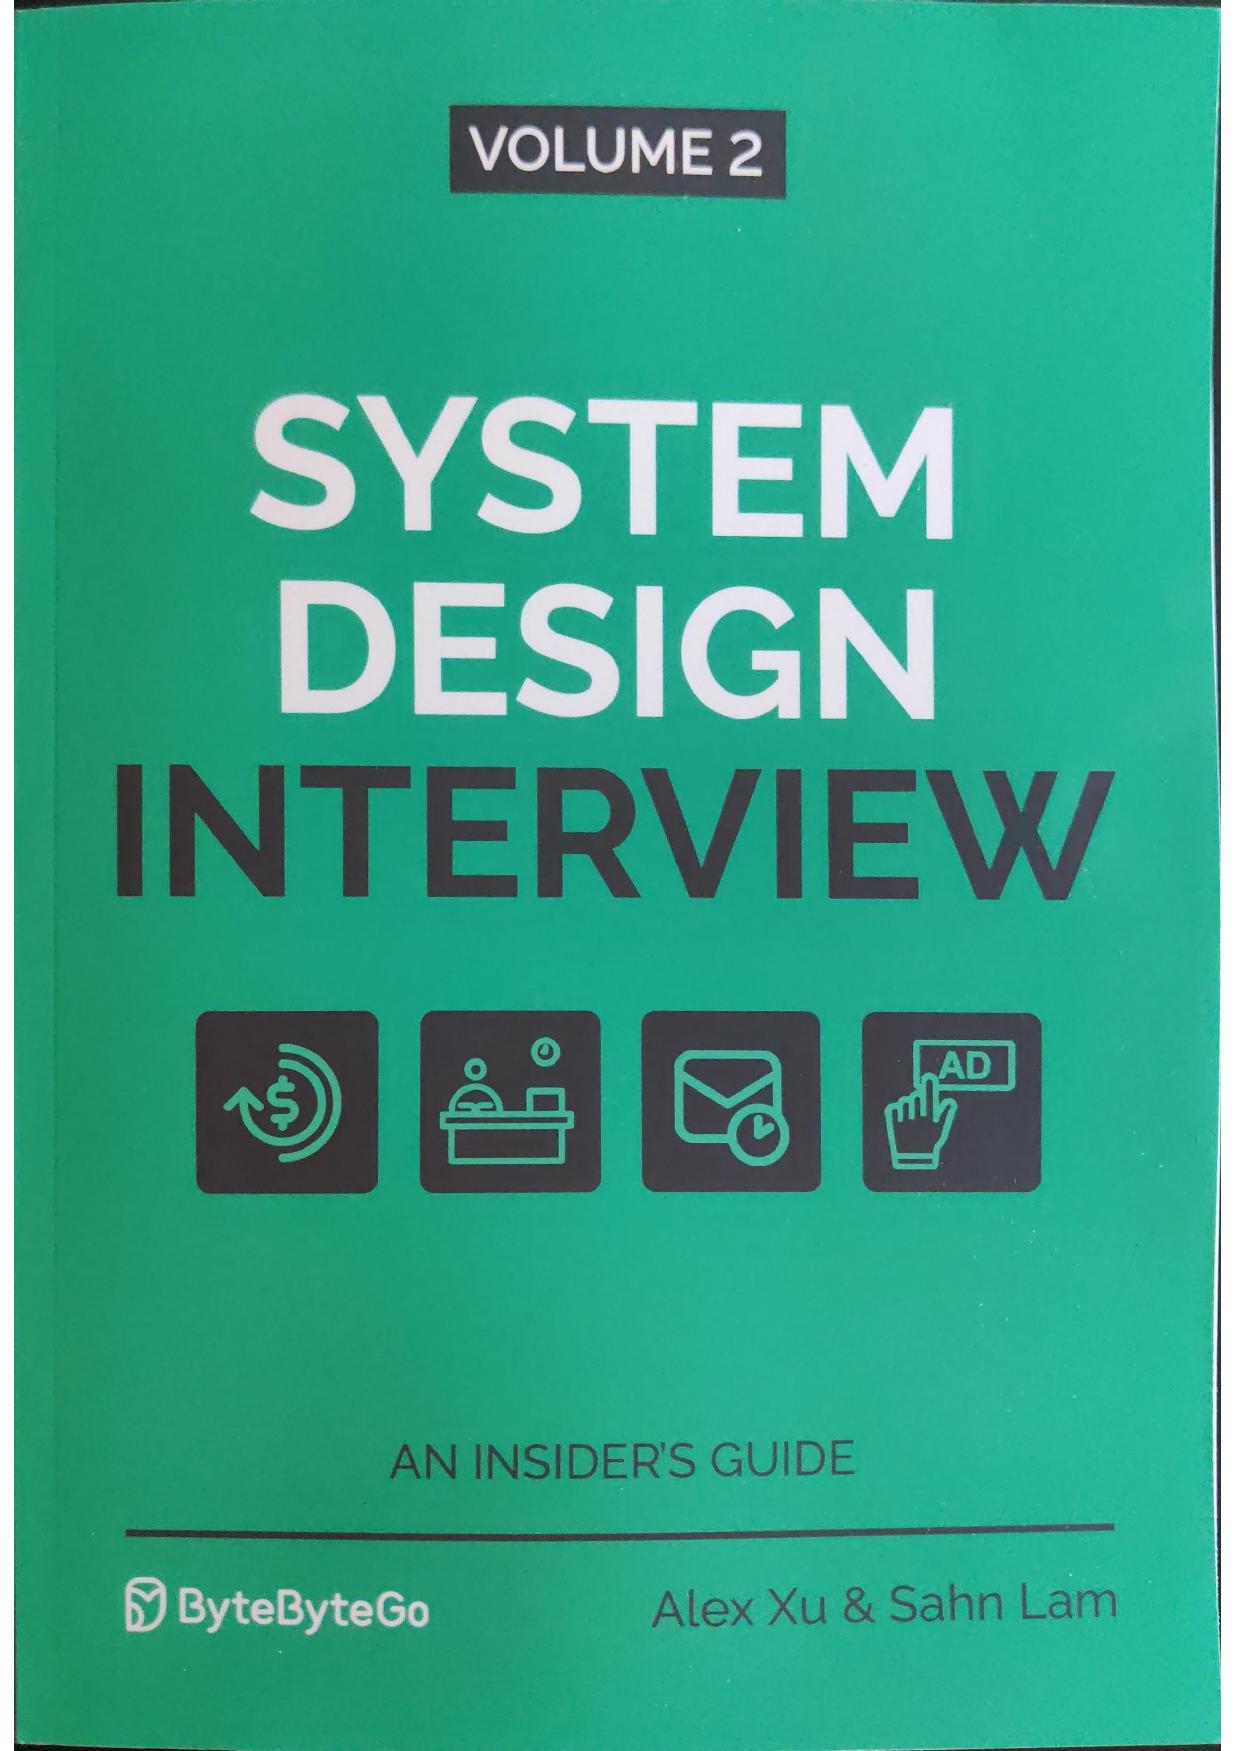 System Design Interview An Insider's Guide Volume 2 by Alex Xu, Sahn Lam by Unknown